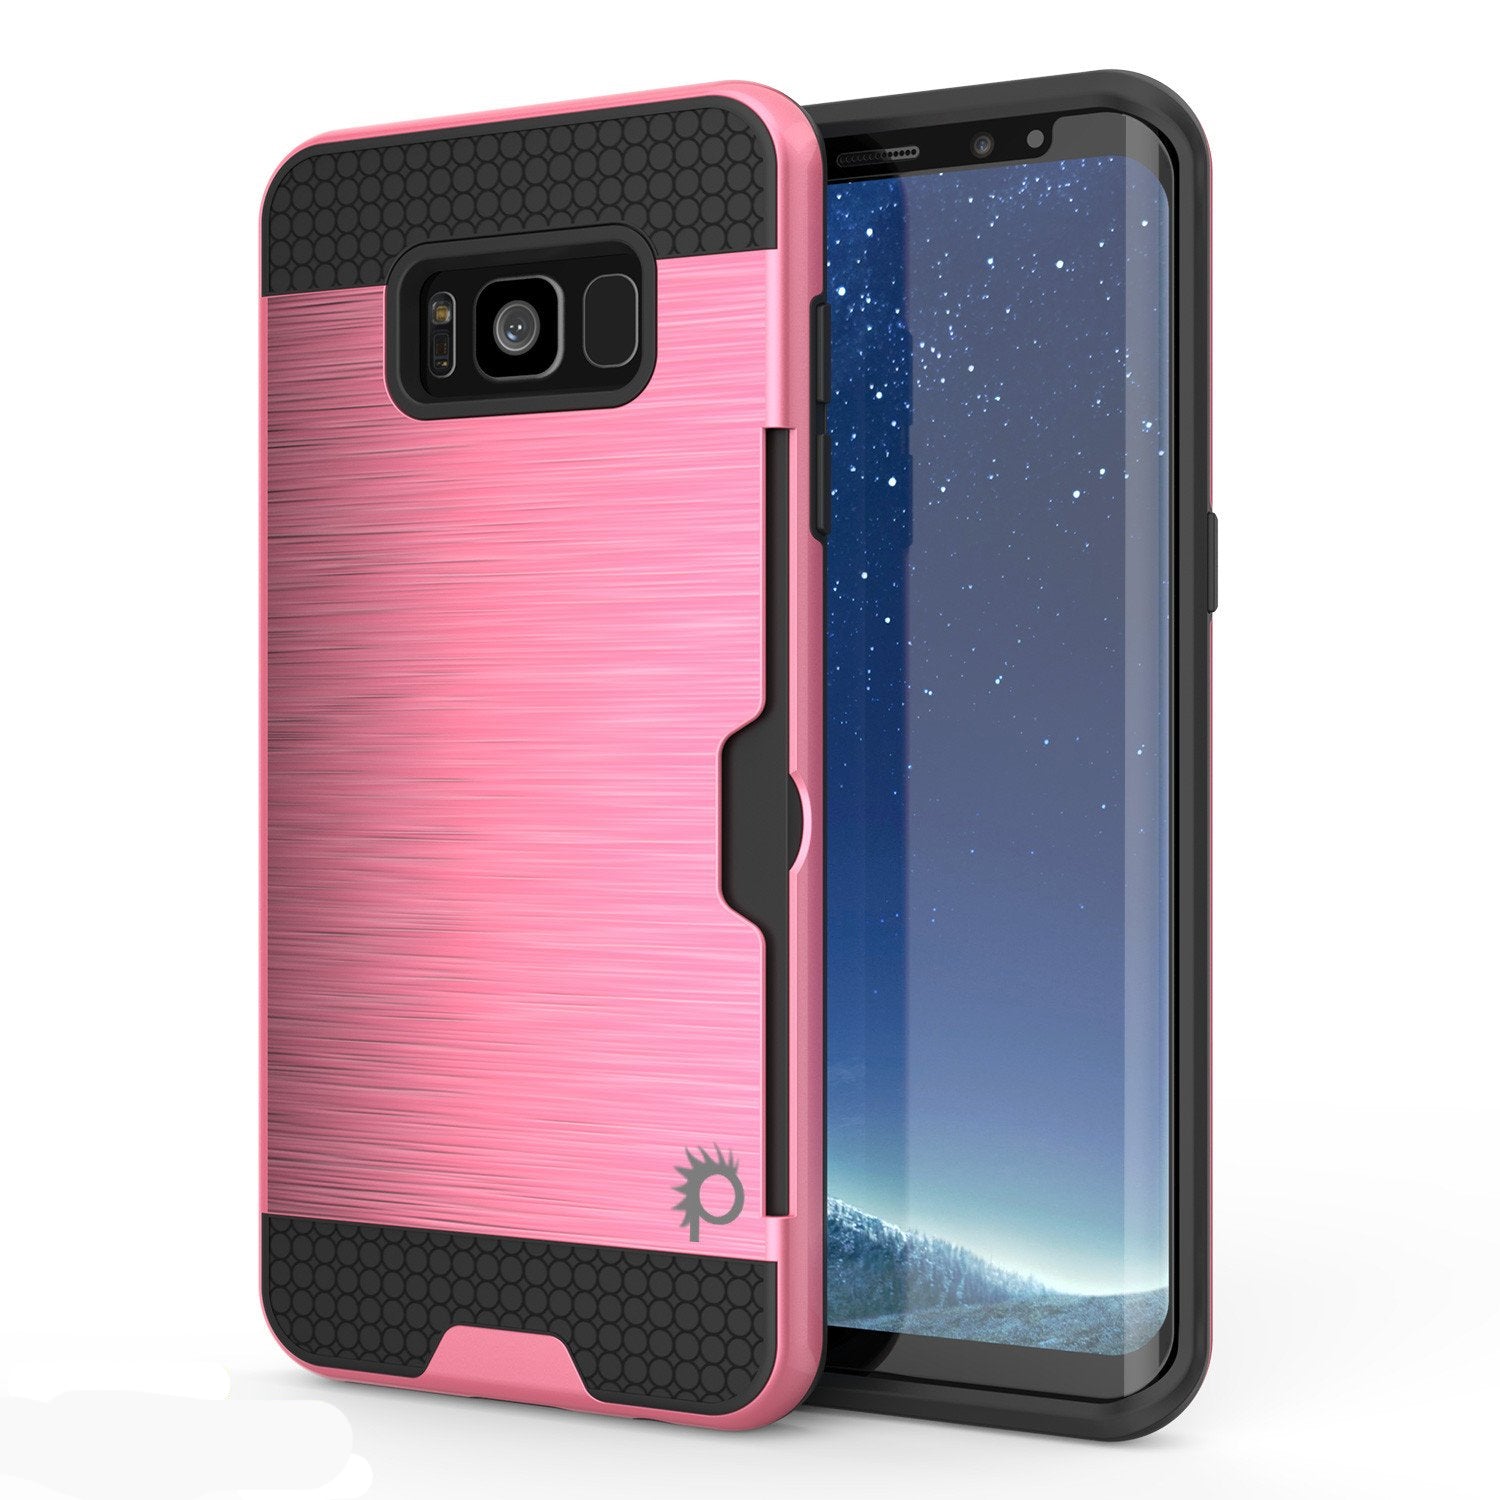 Galaxy S8 Case PunkCase SLOT Pink Series Slim Armor Soft Cover Case